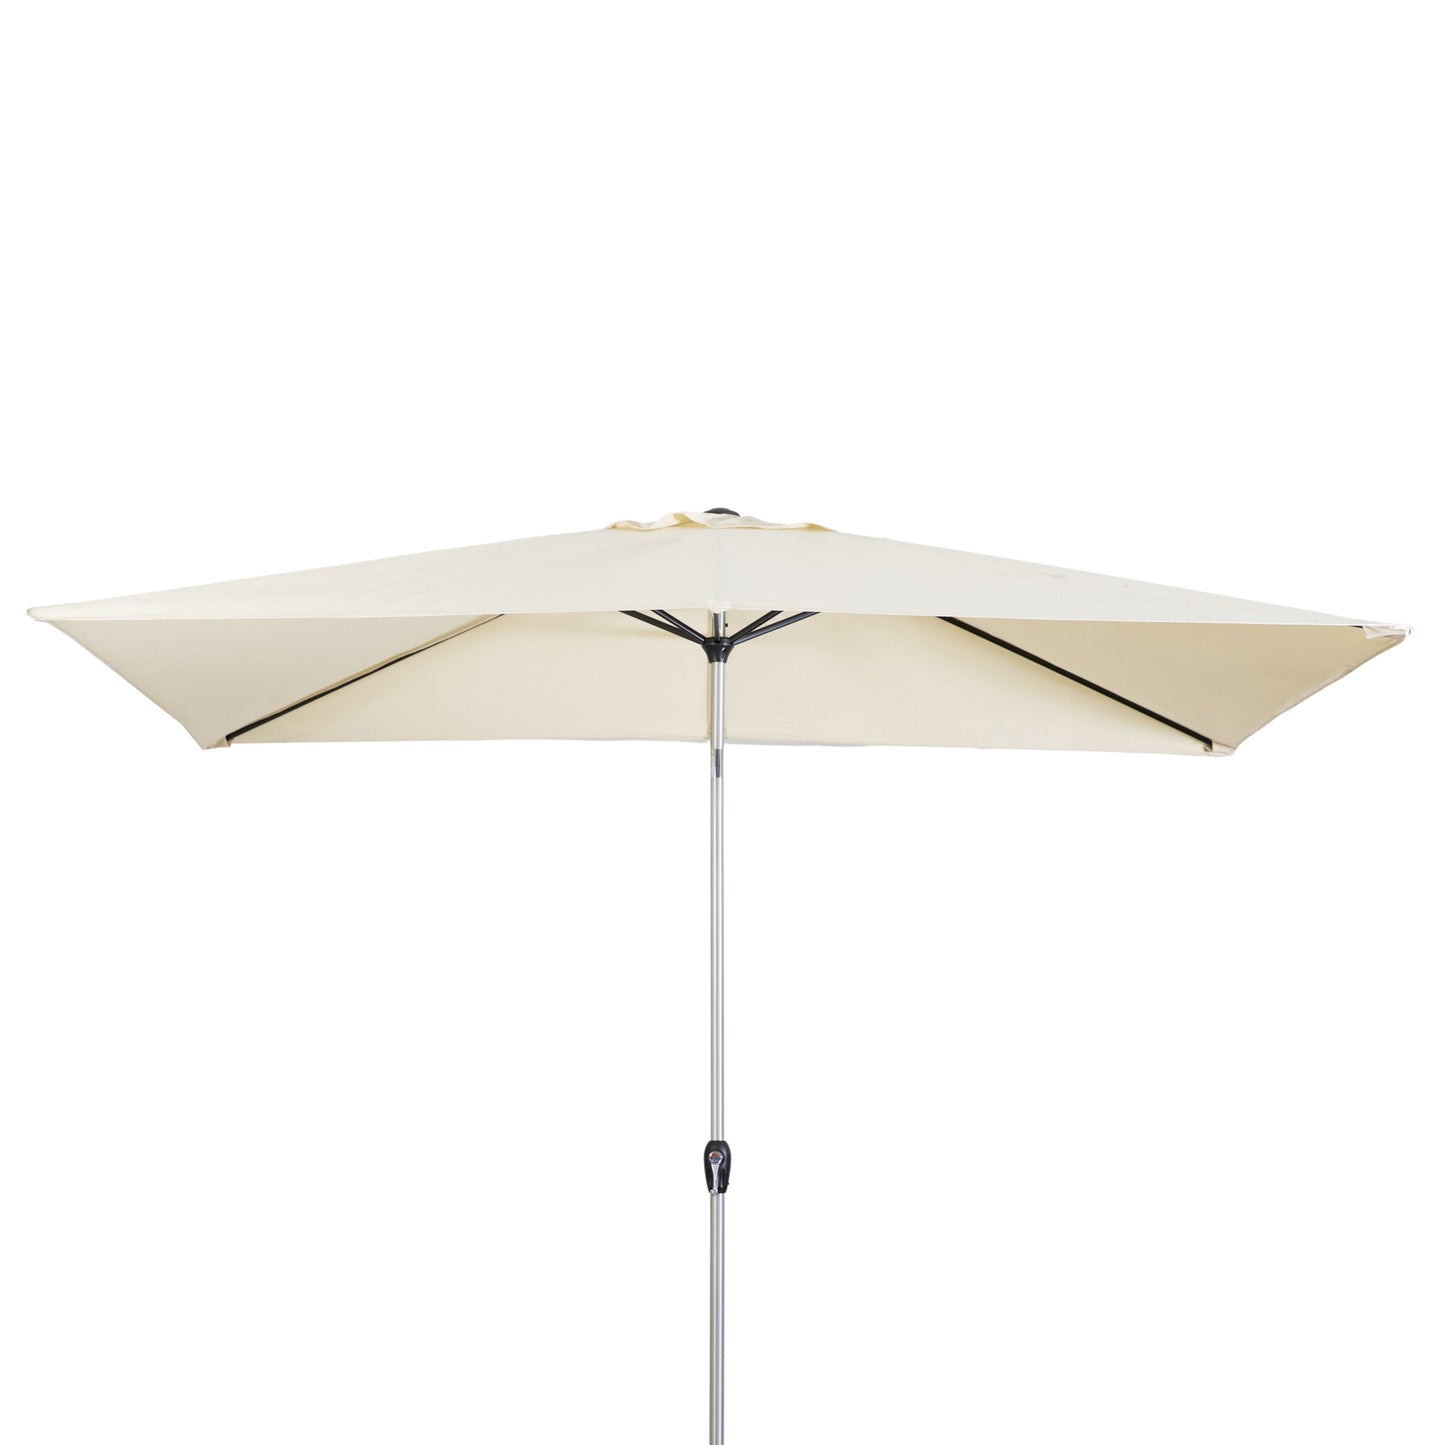 A cream Alwington parasol showcased against a white background, adding elegance to home furniture.